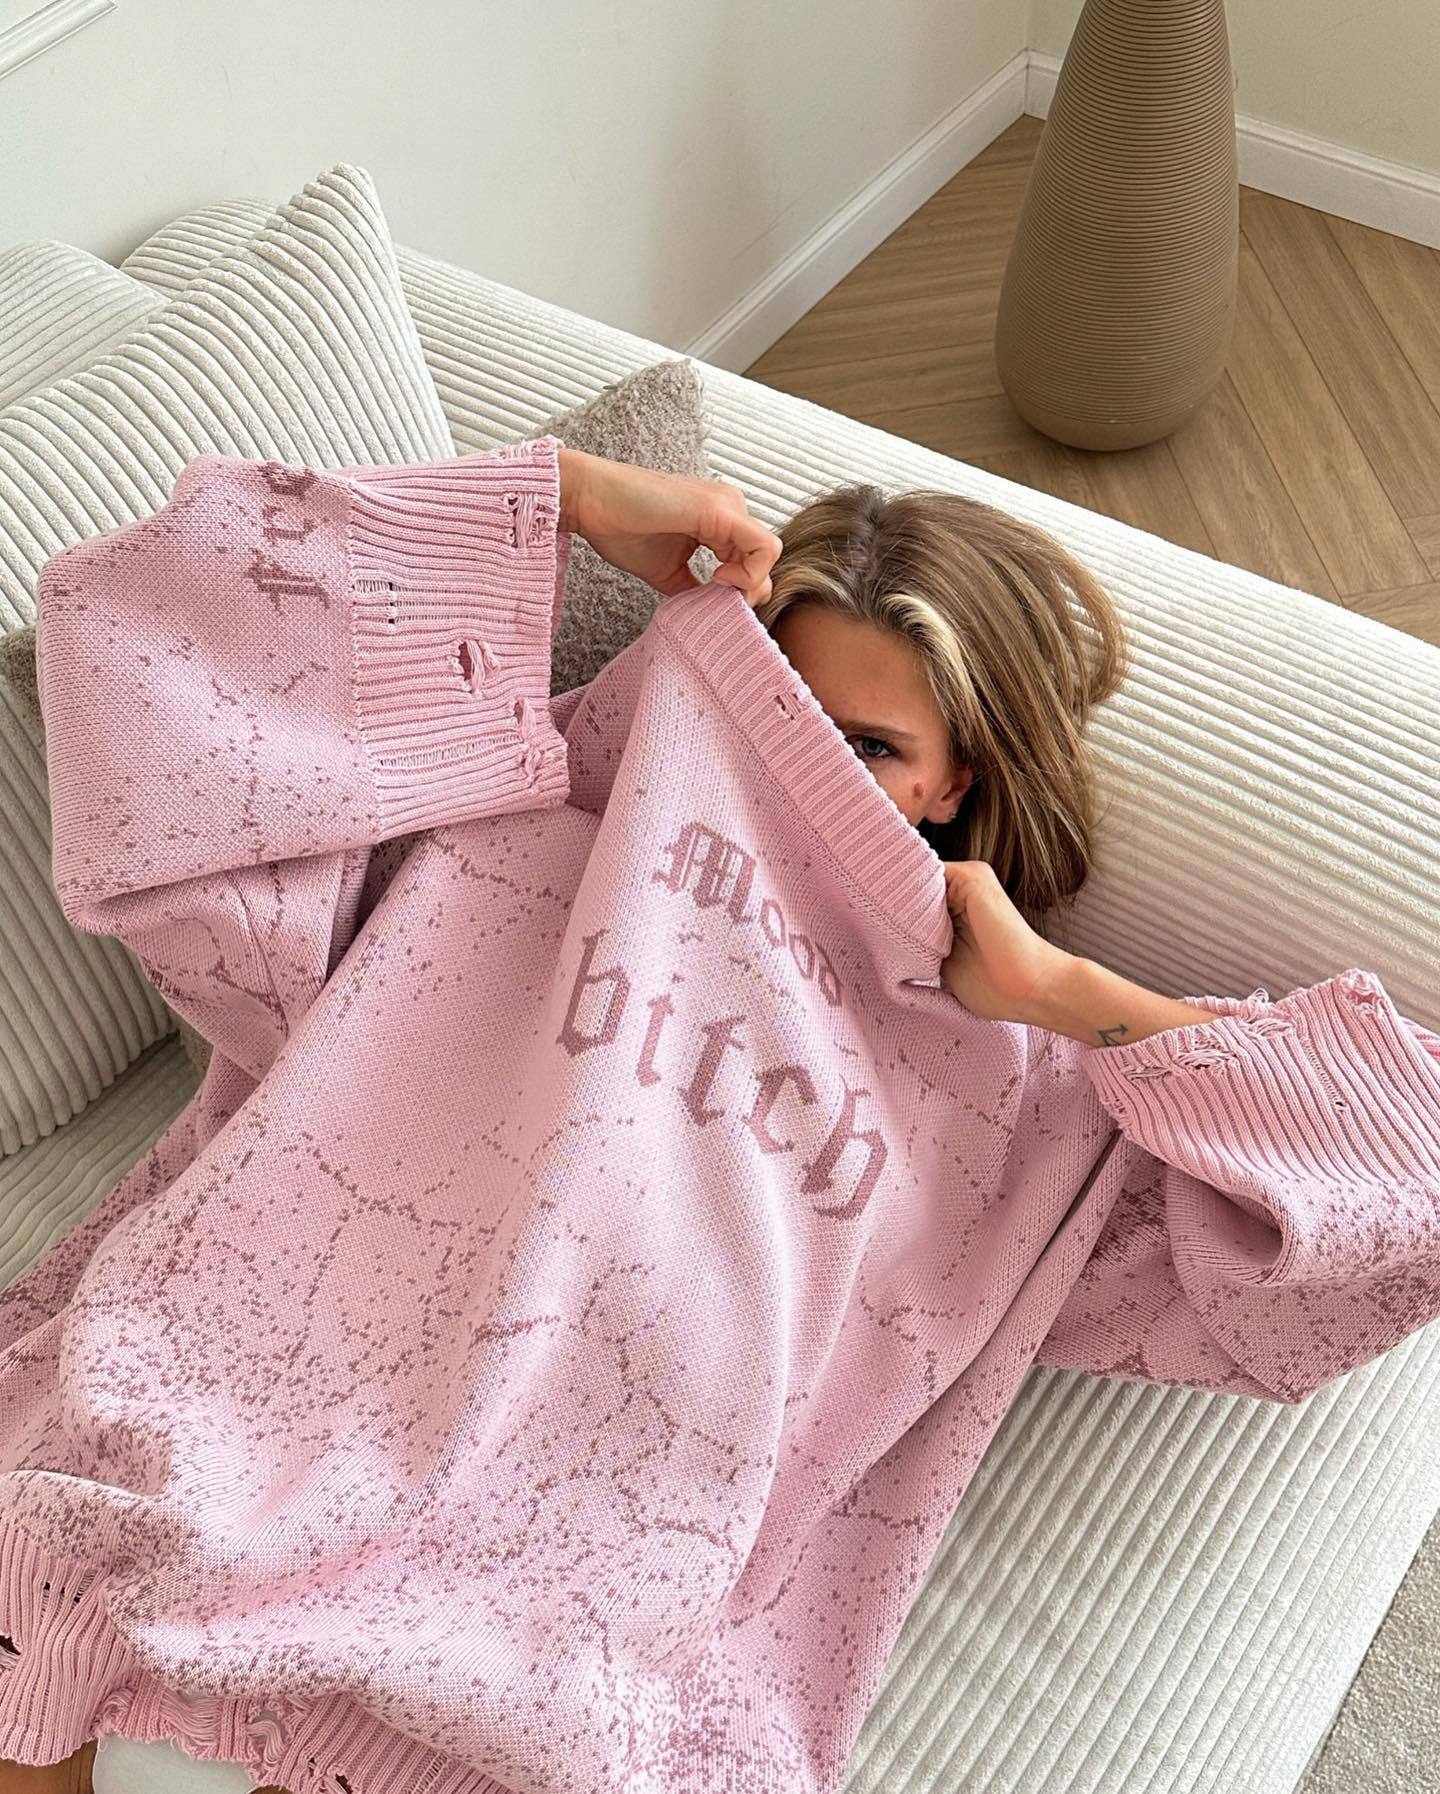 Street style loose letter embroidered sweatshirt